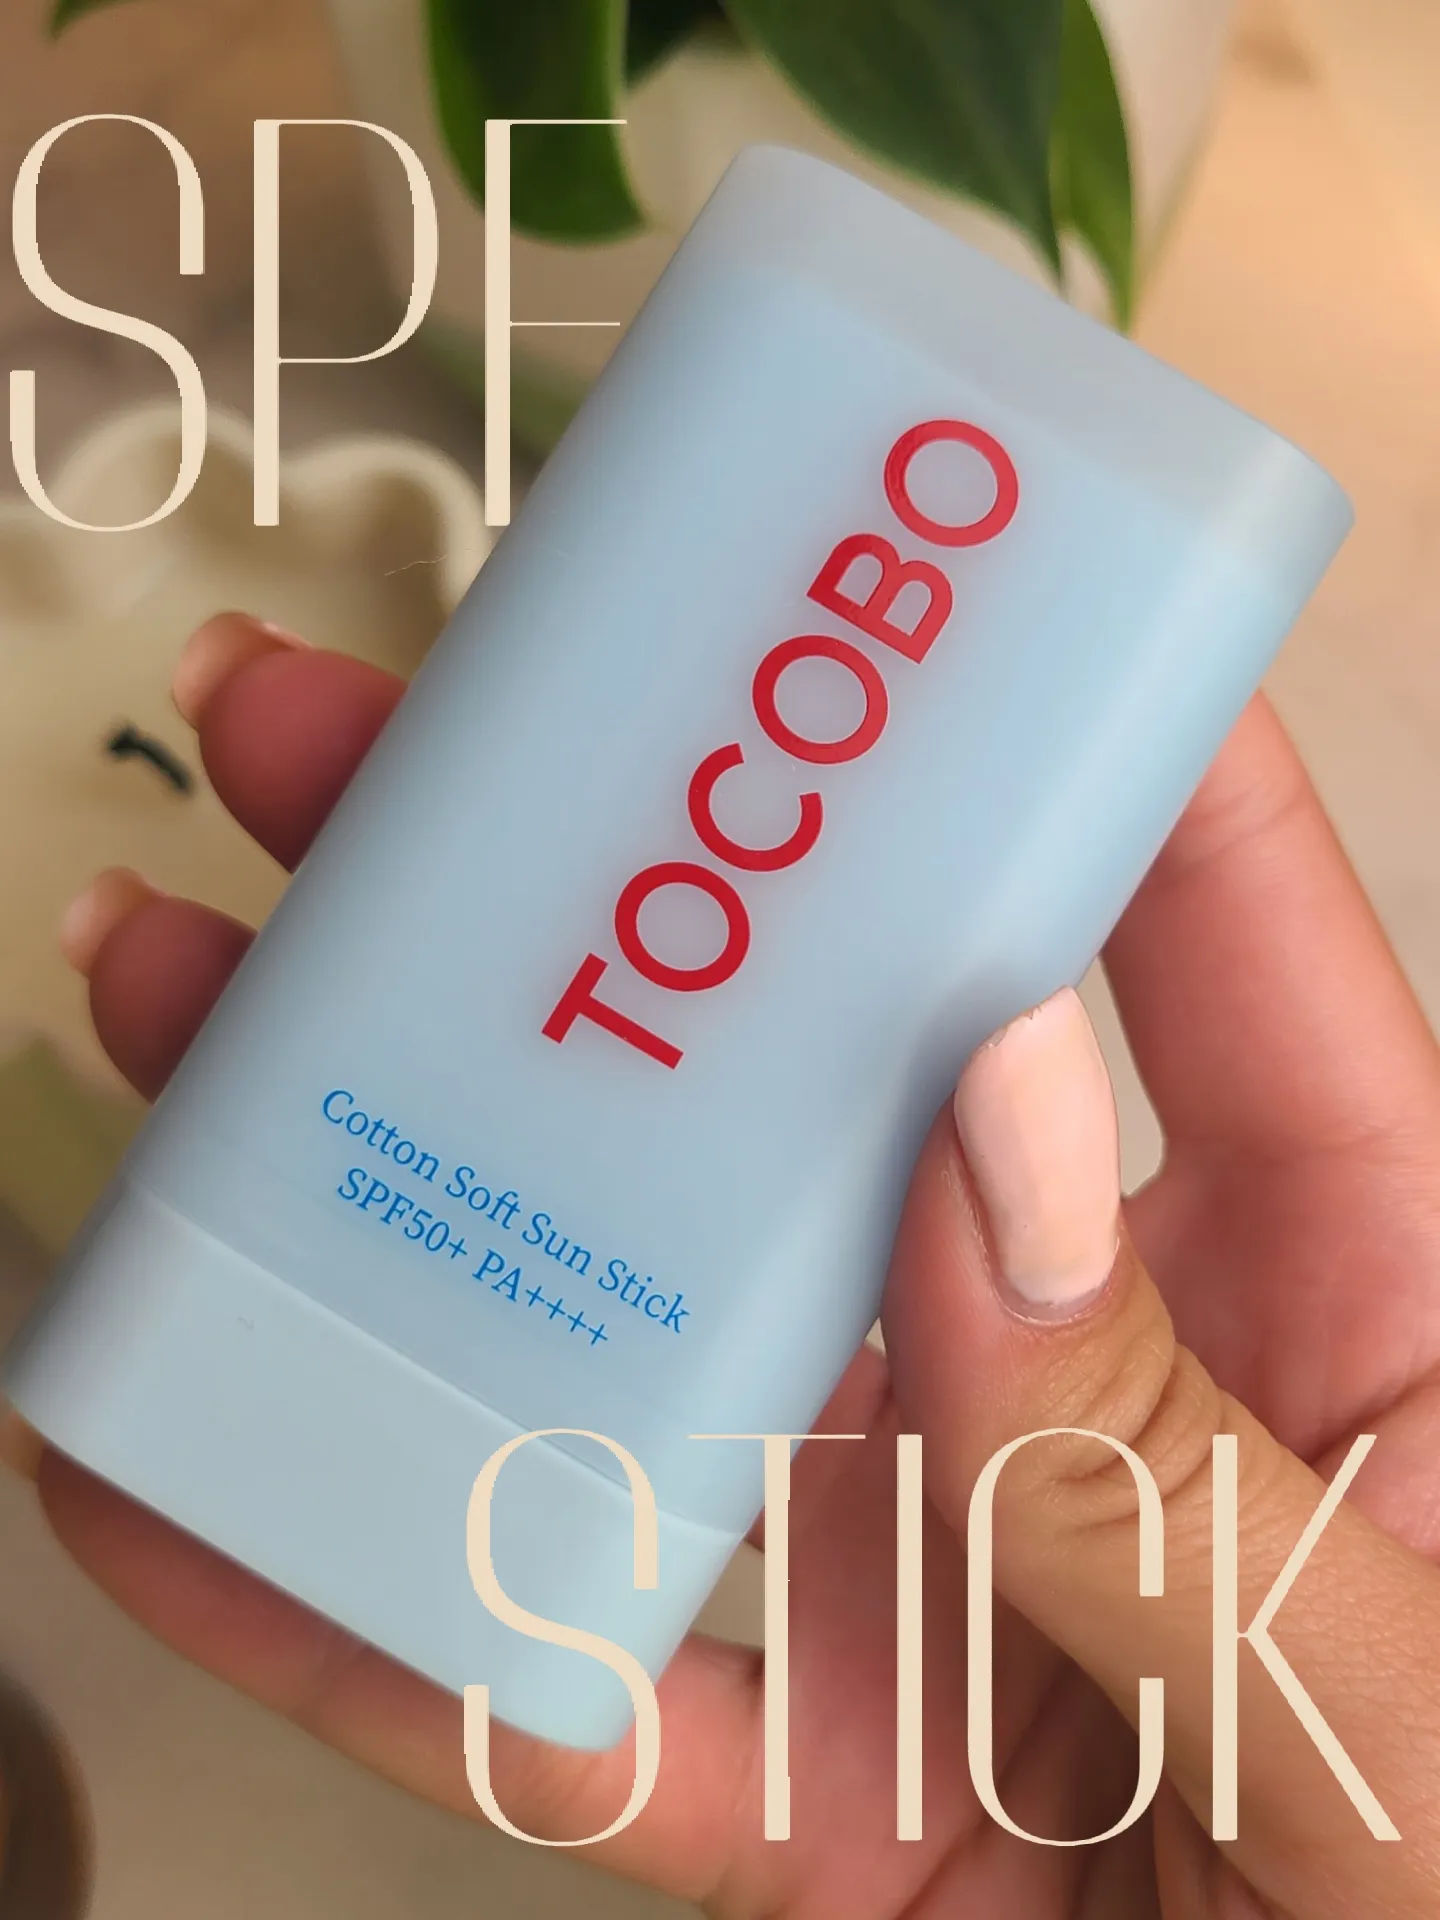 TOCOBO Cotton Soft Sun Stick SPF50+ PA++++ 2-PACK Smooth, Invisible Matte  Finish